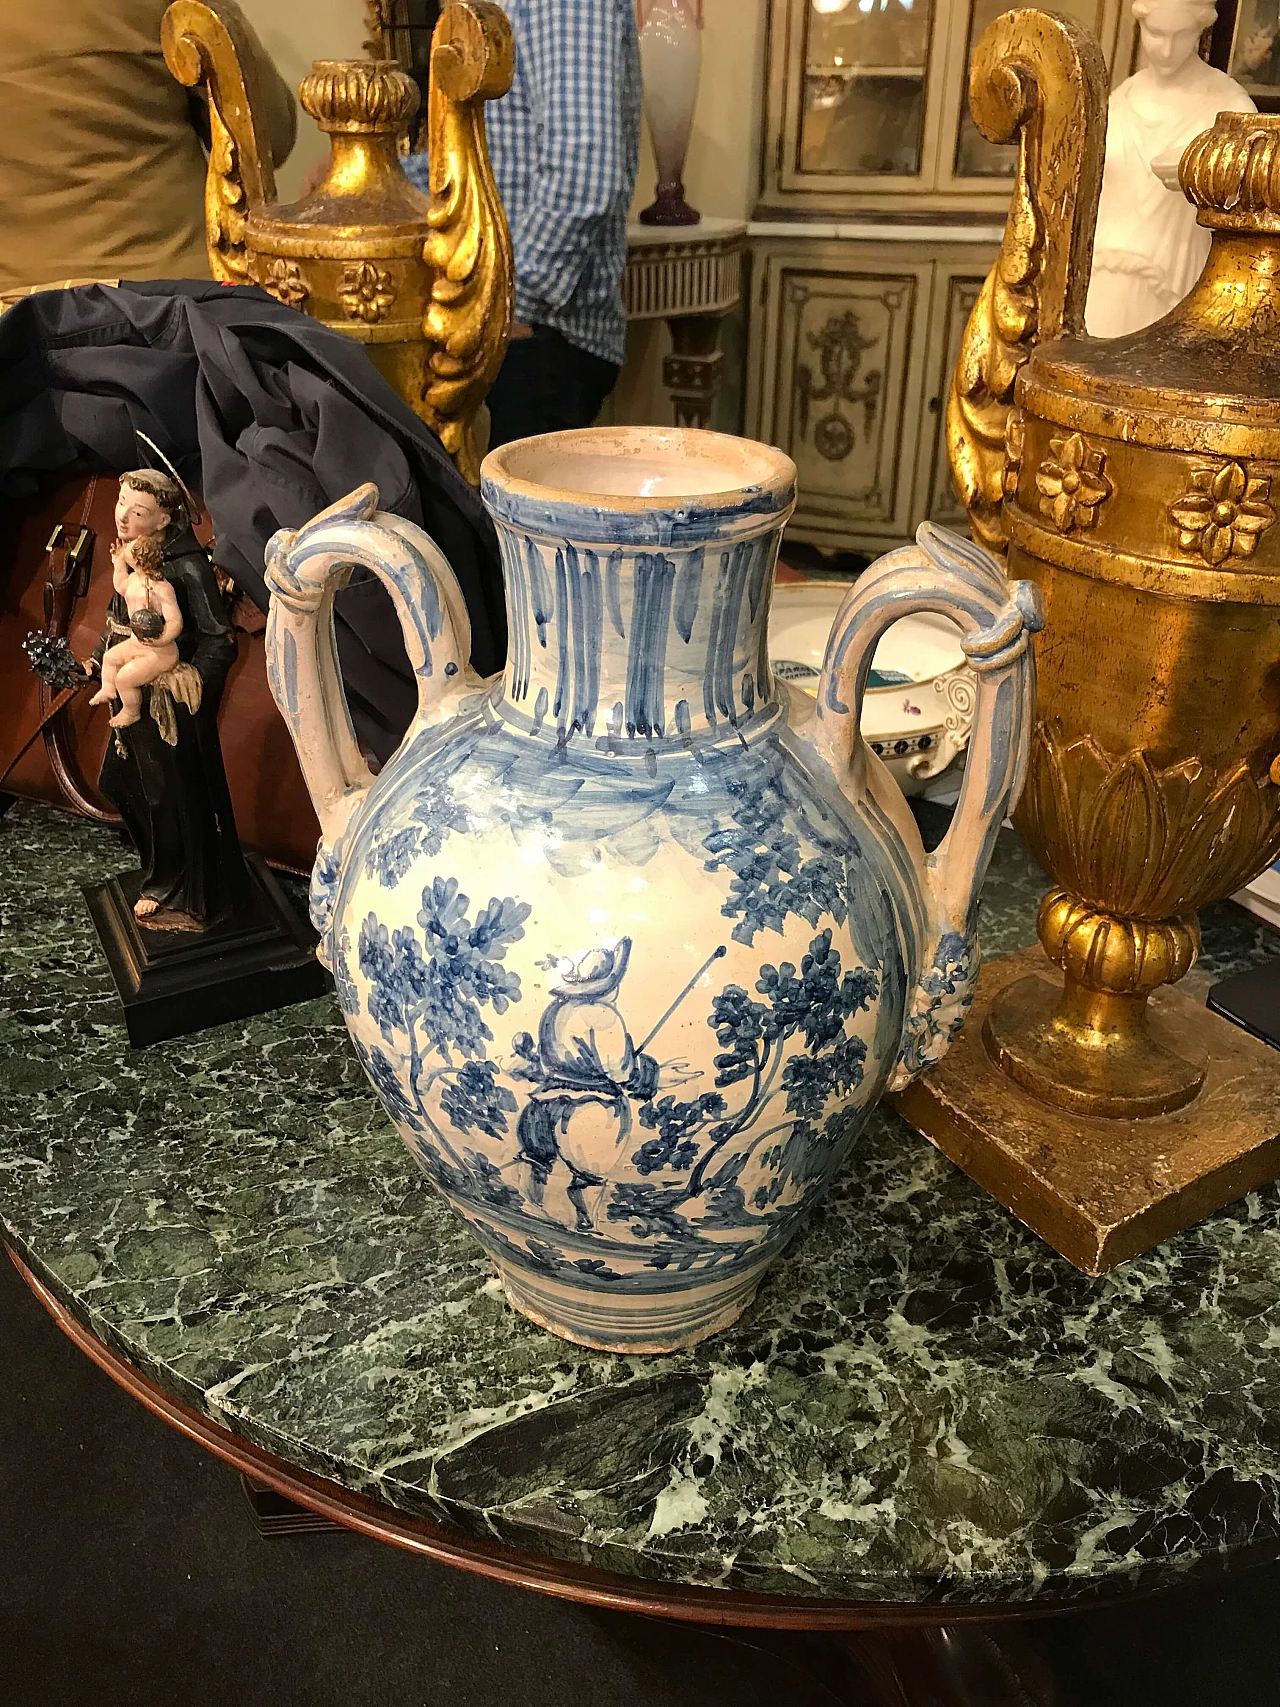 Neapolitan Vase  by Andrea Vaccari in blue painted majolica, 18th century 1073217